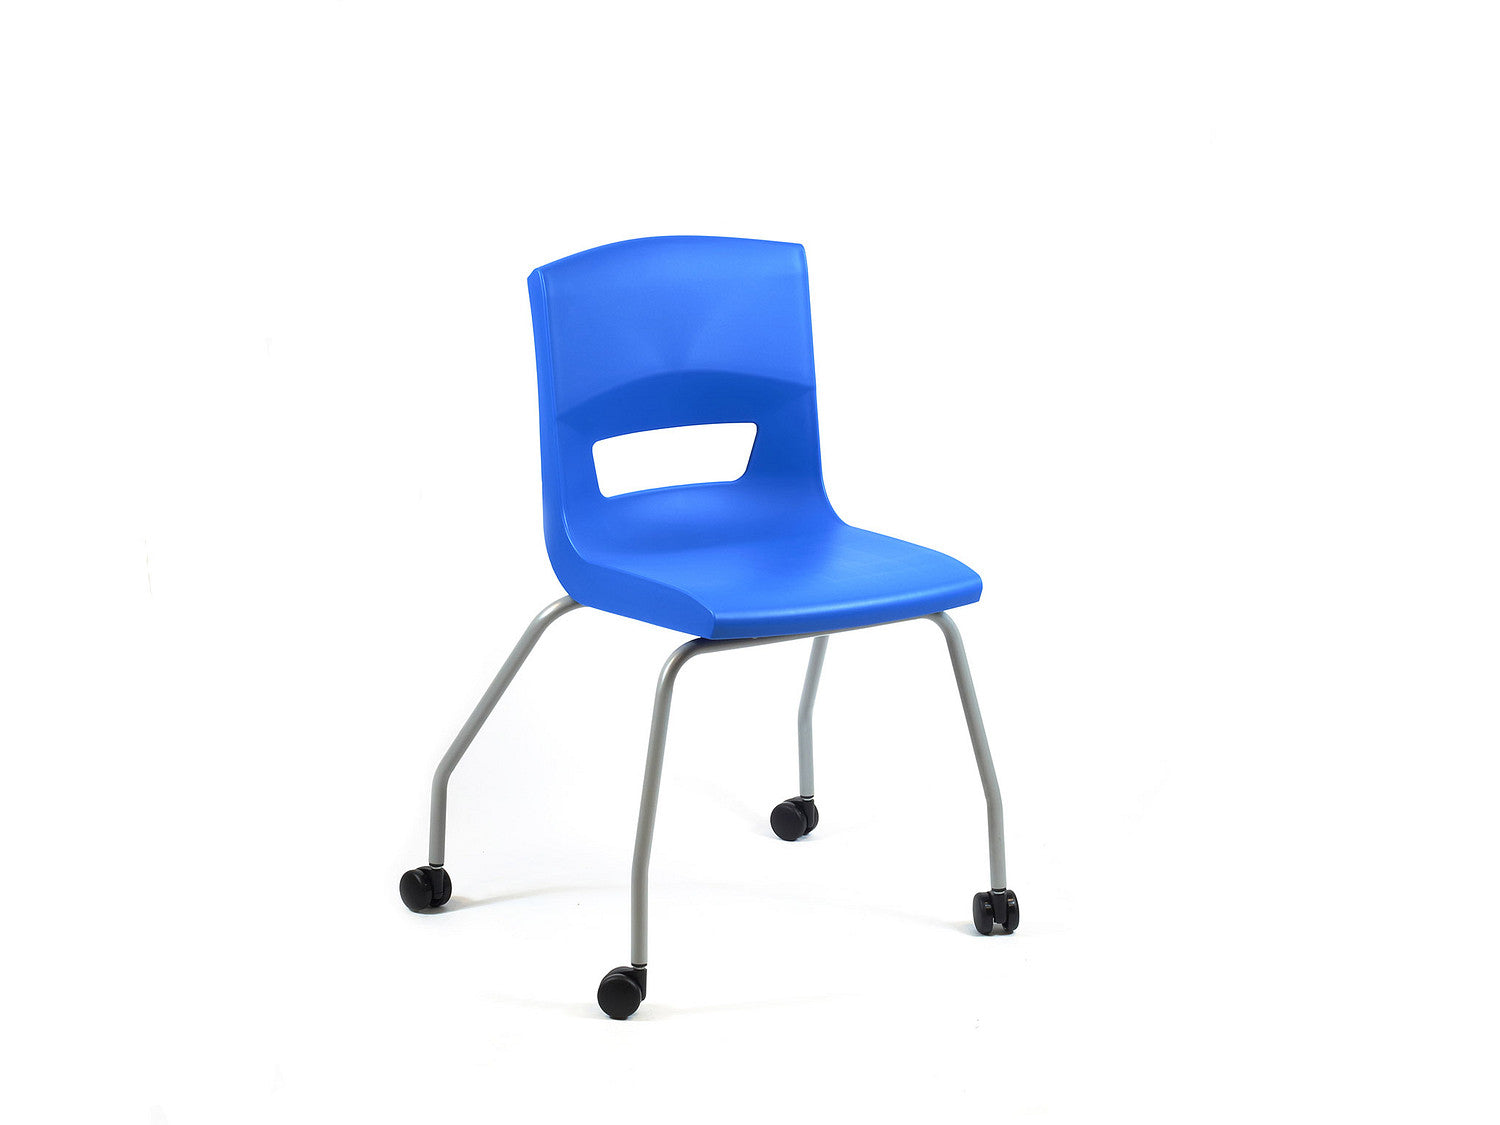 Postura 4 legs on castor unique stlye classroom chair ink blue